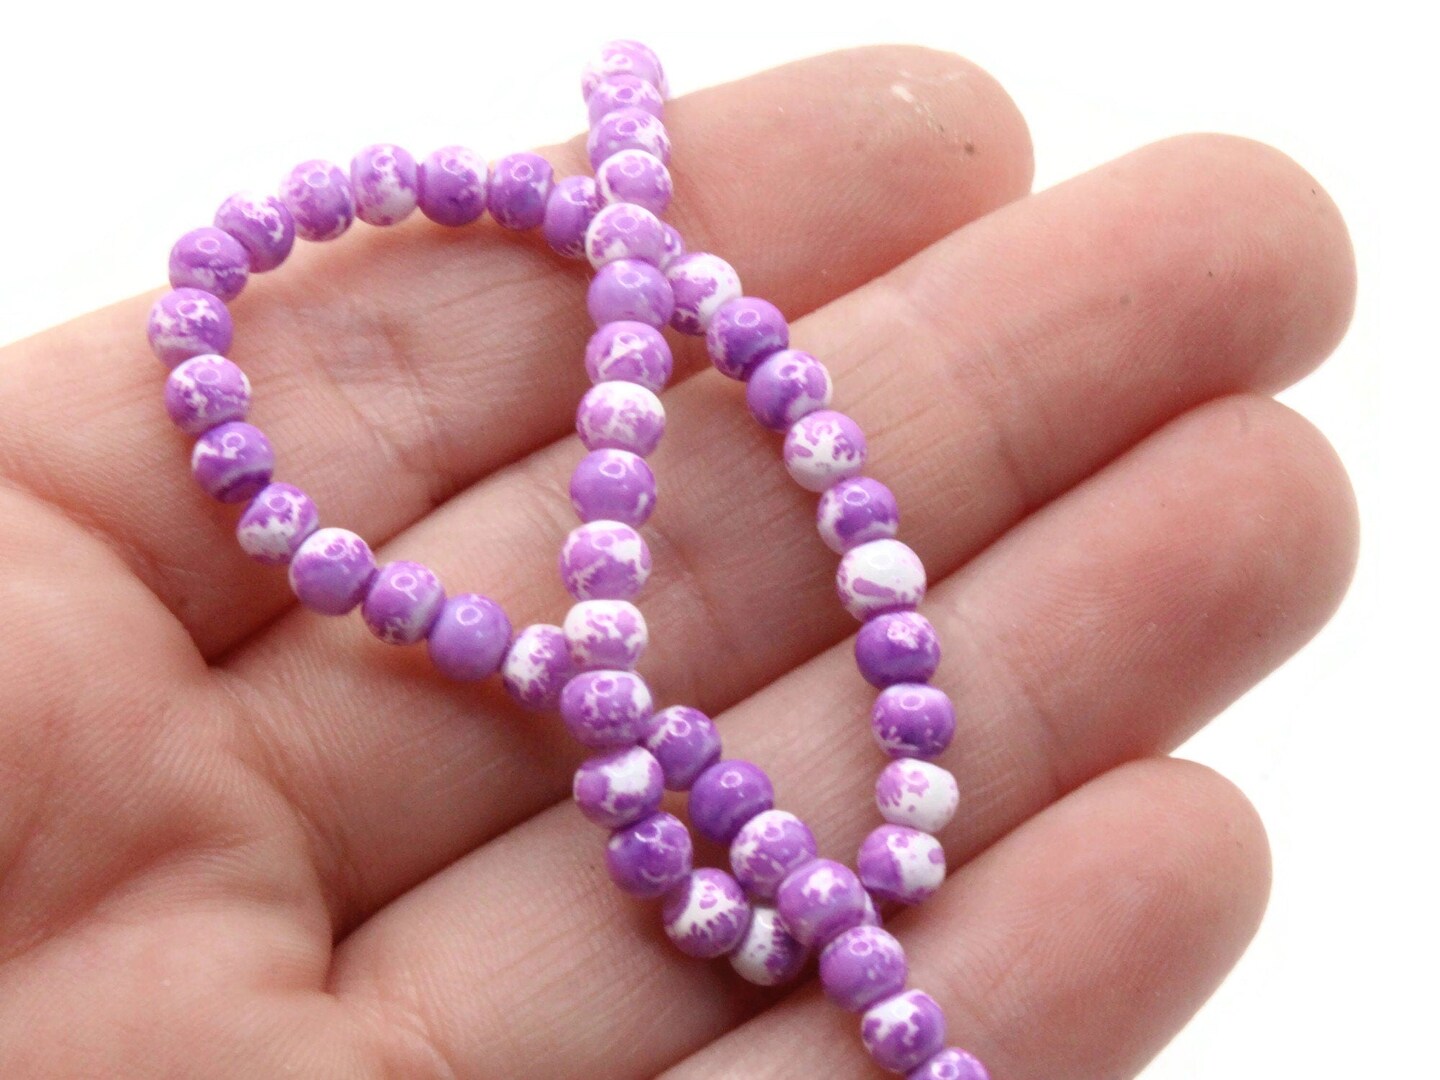 100 4mm White with Purple Splatter Paint Smooth Round Glass Beads